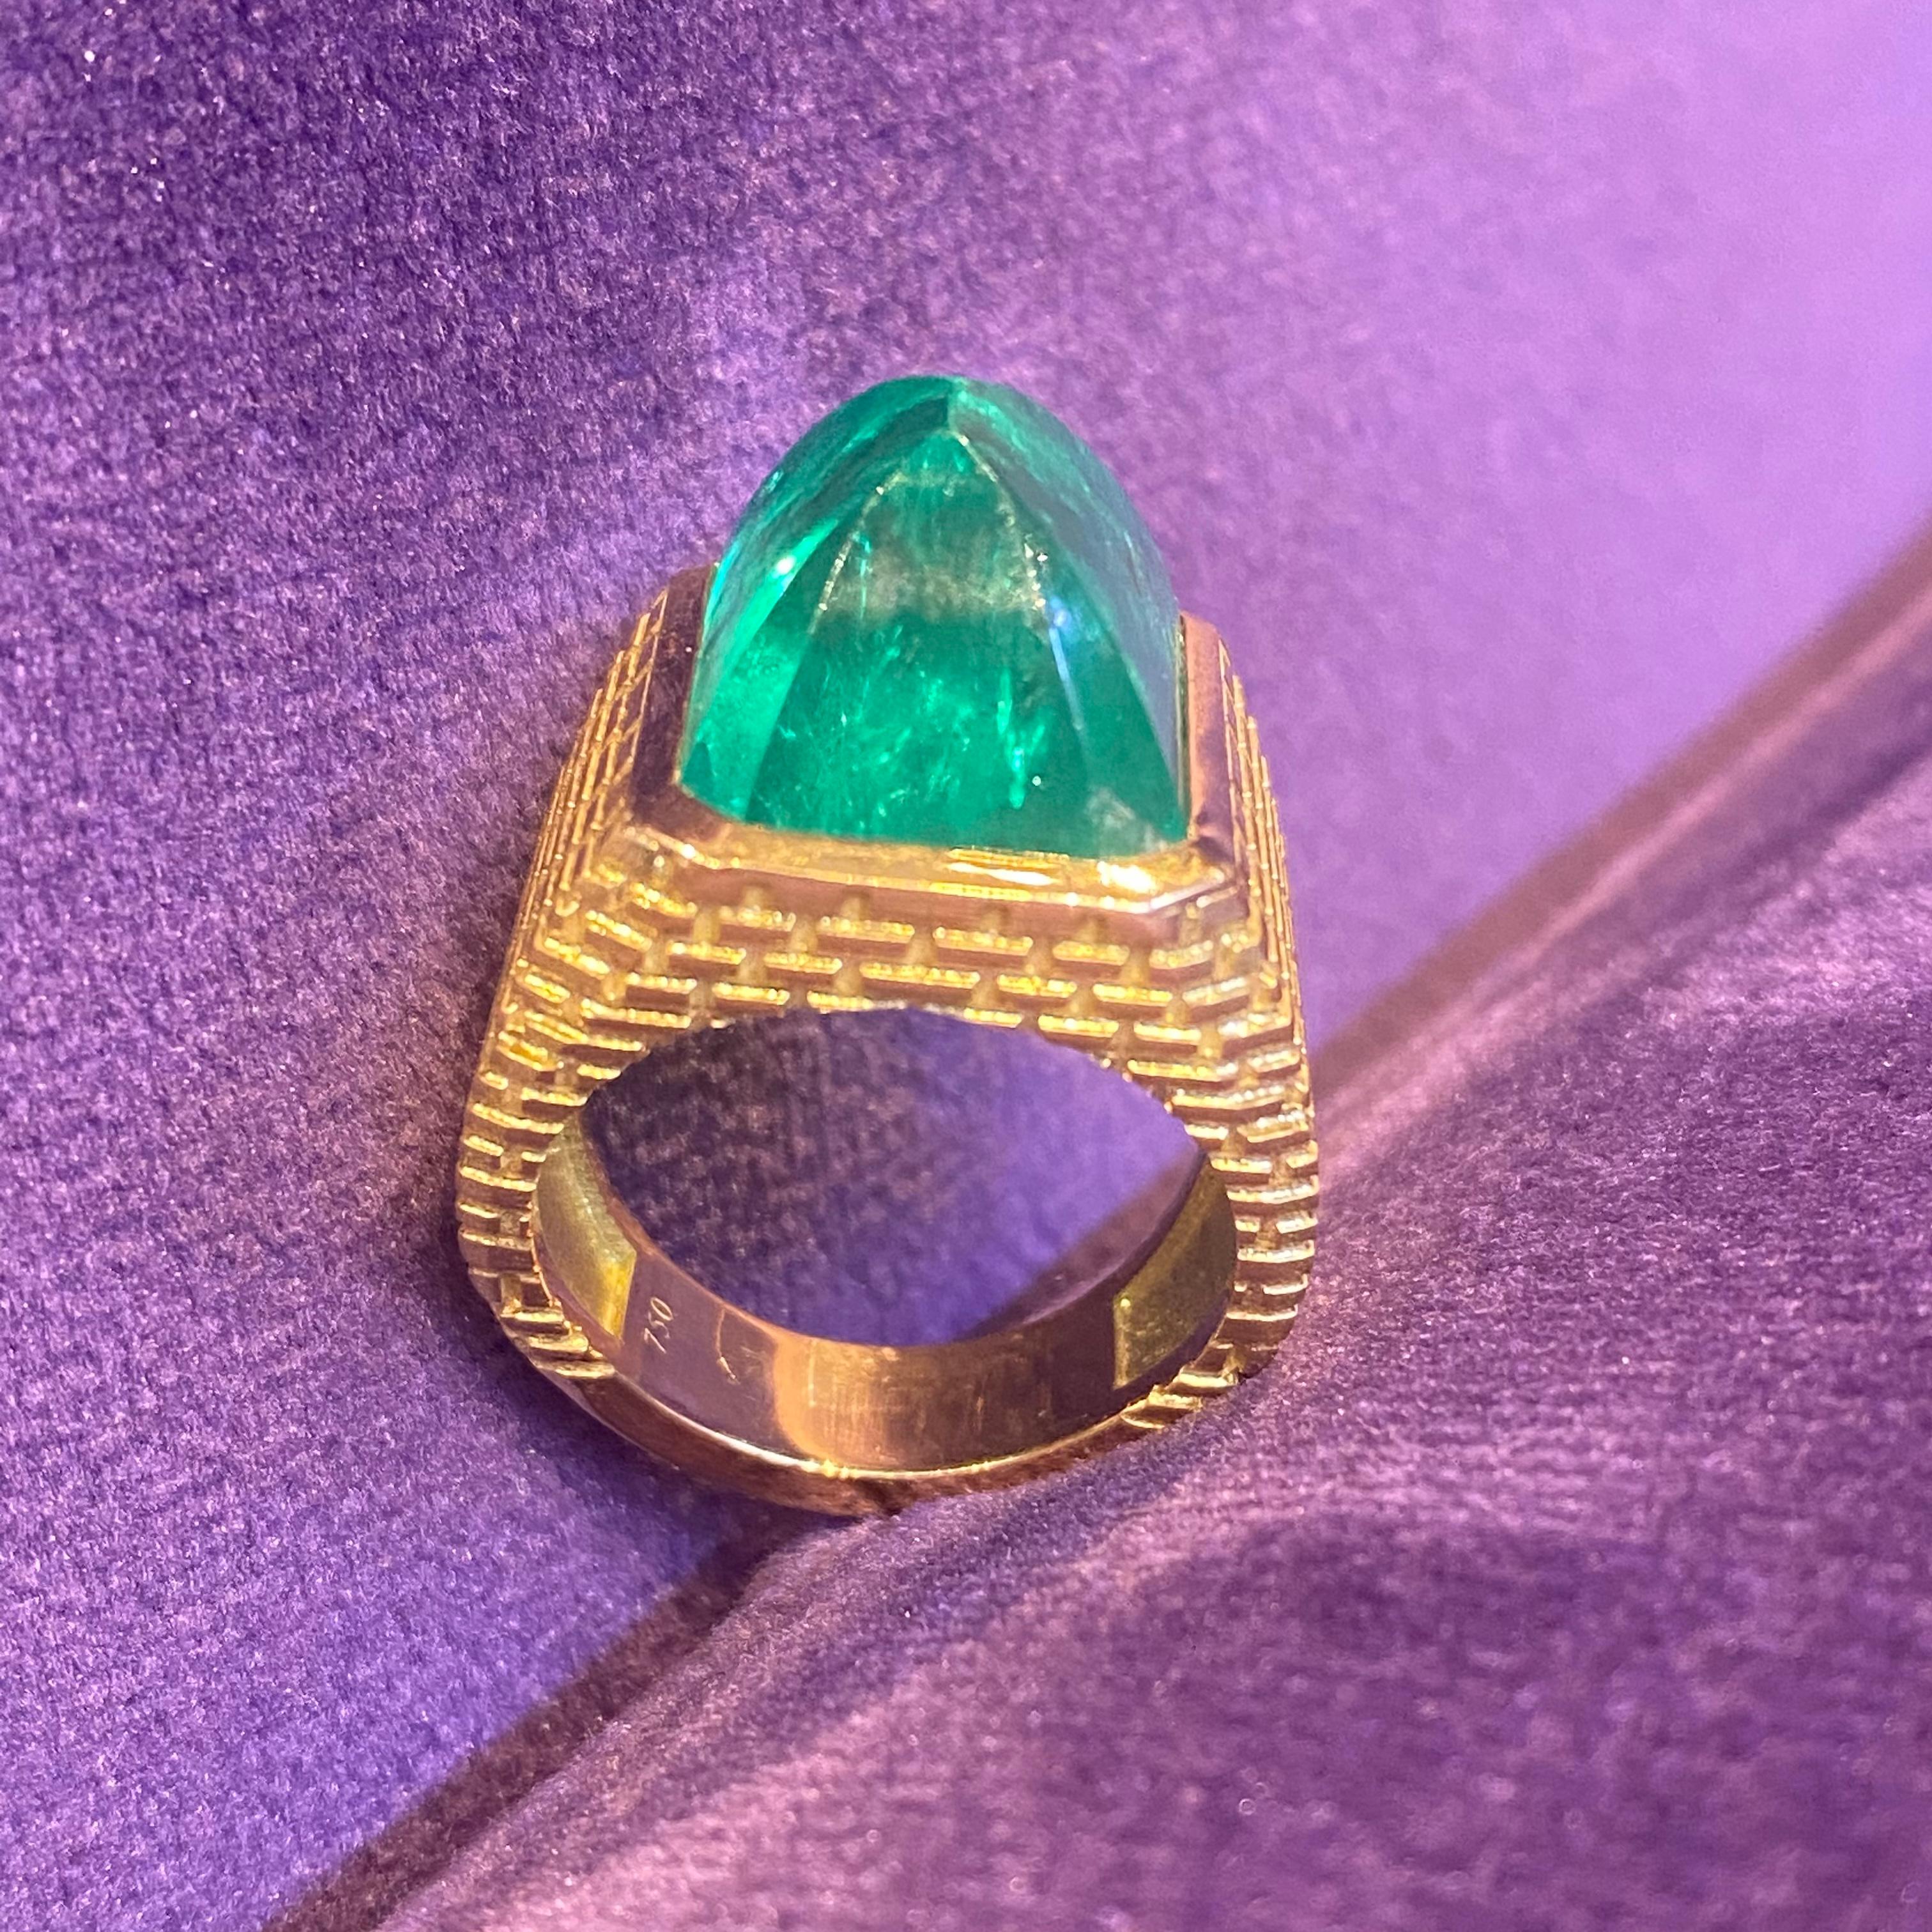 Men's Certified 15.13 Ct Cabochon Emerald Pyramid Ring For Sale 2